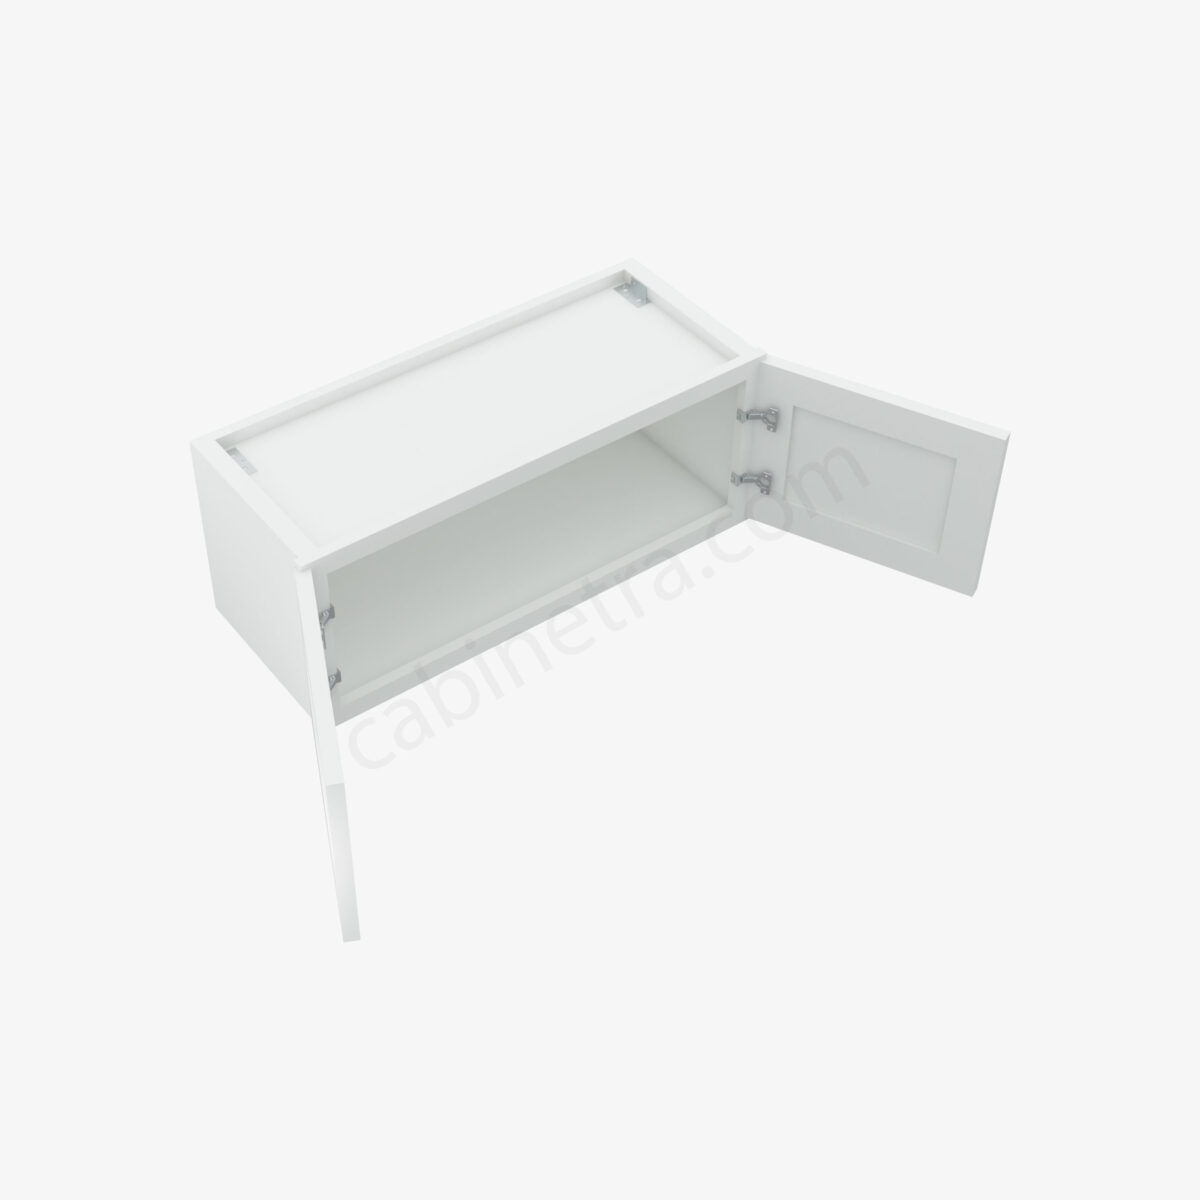 TW W3012B 2 Forevermark Uptown White Cabinetra scaled